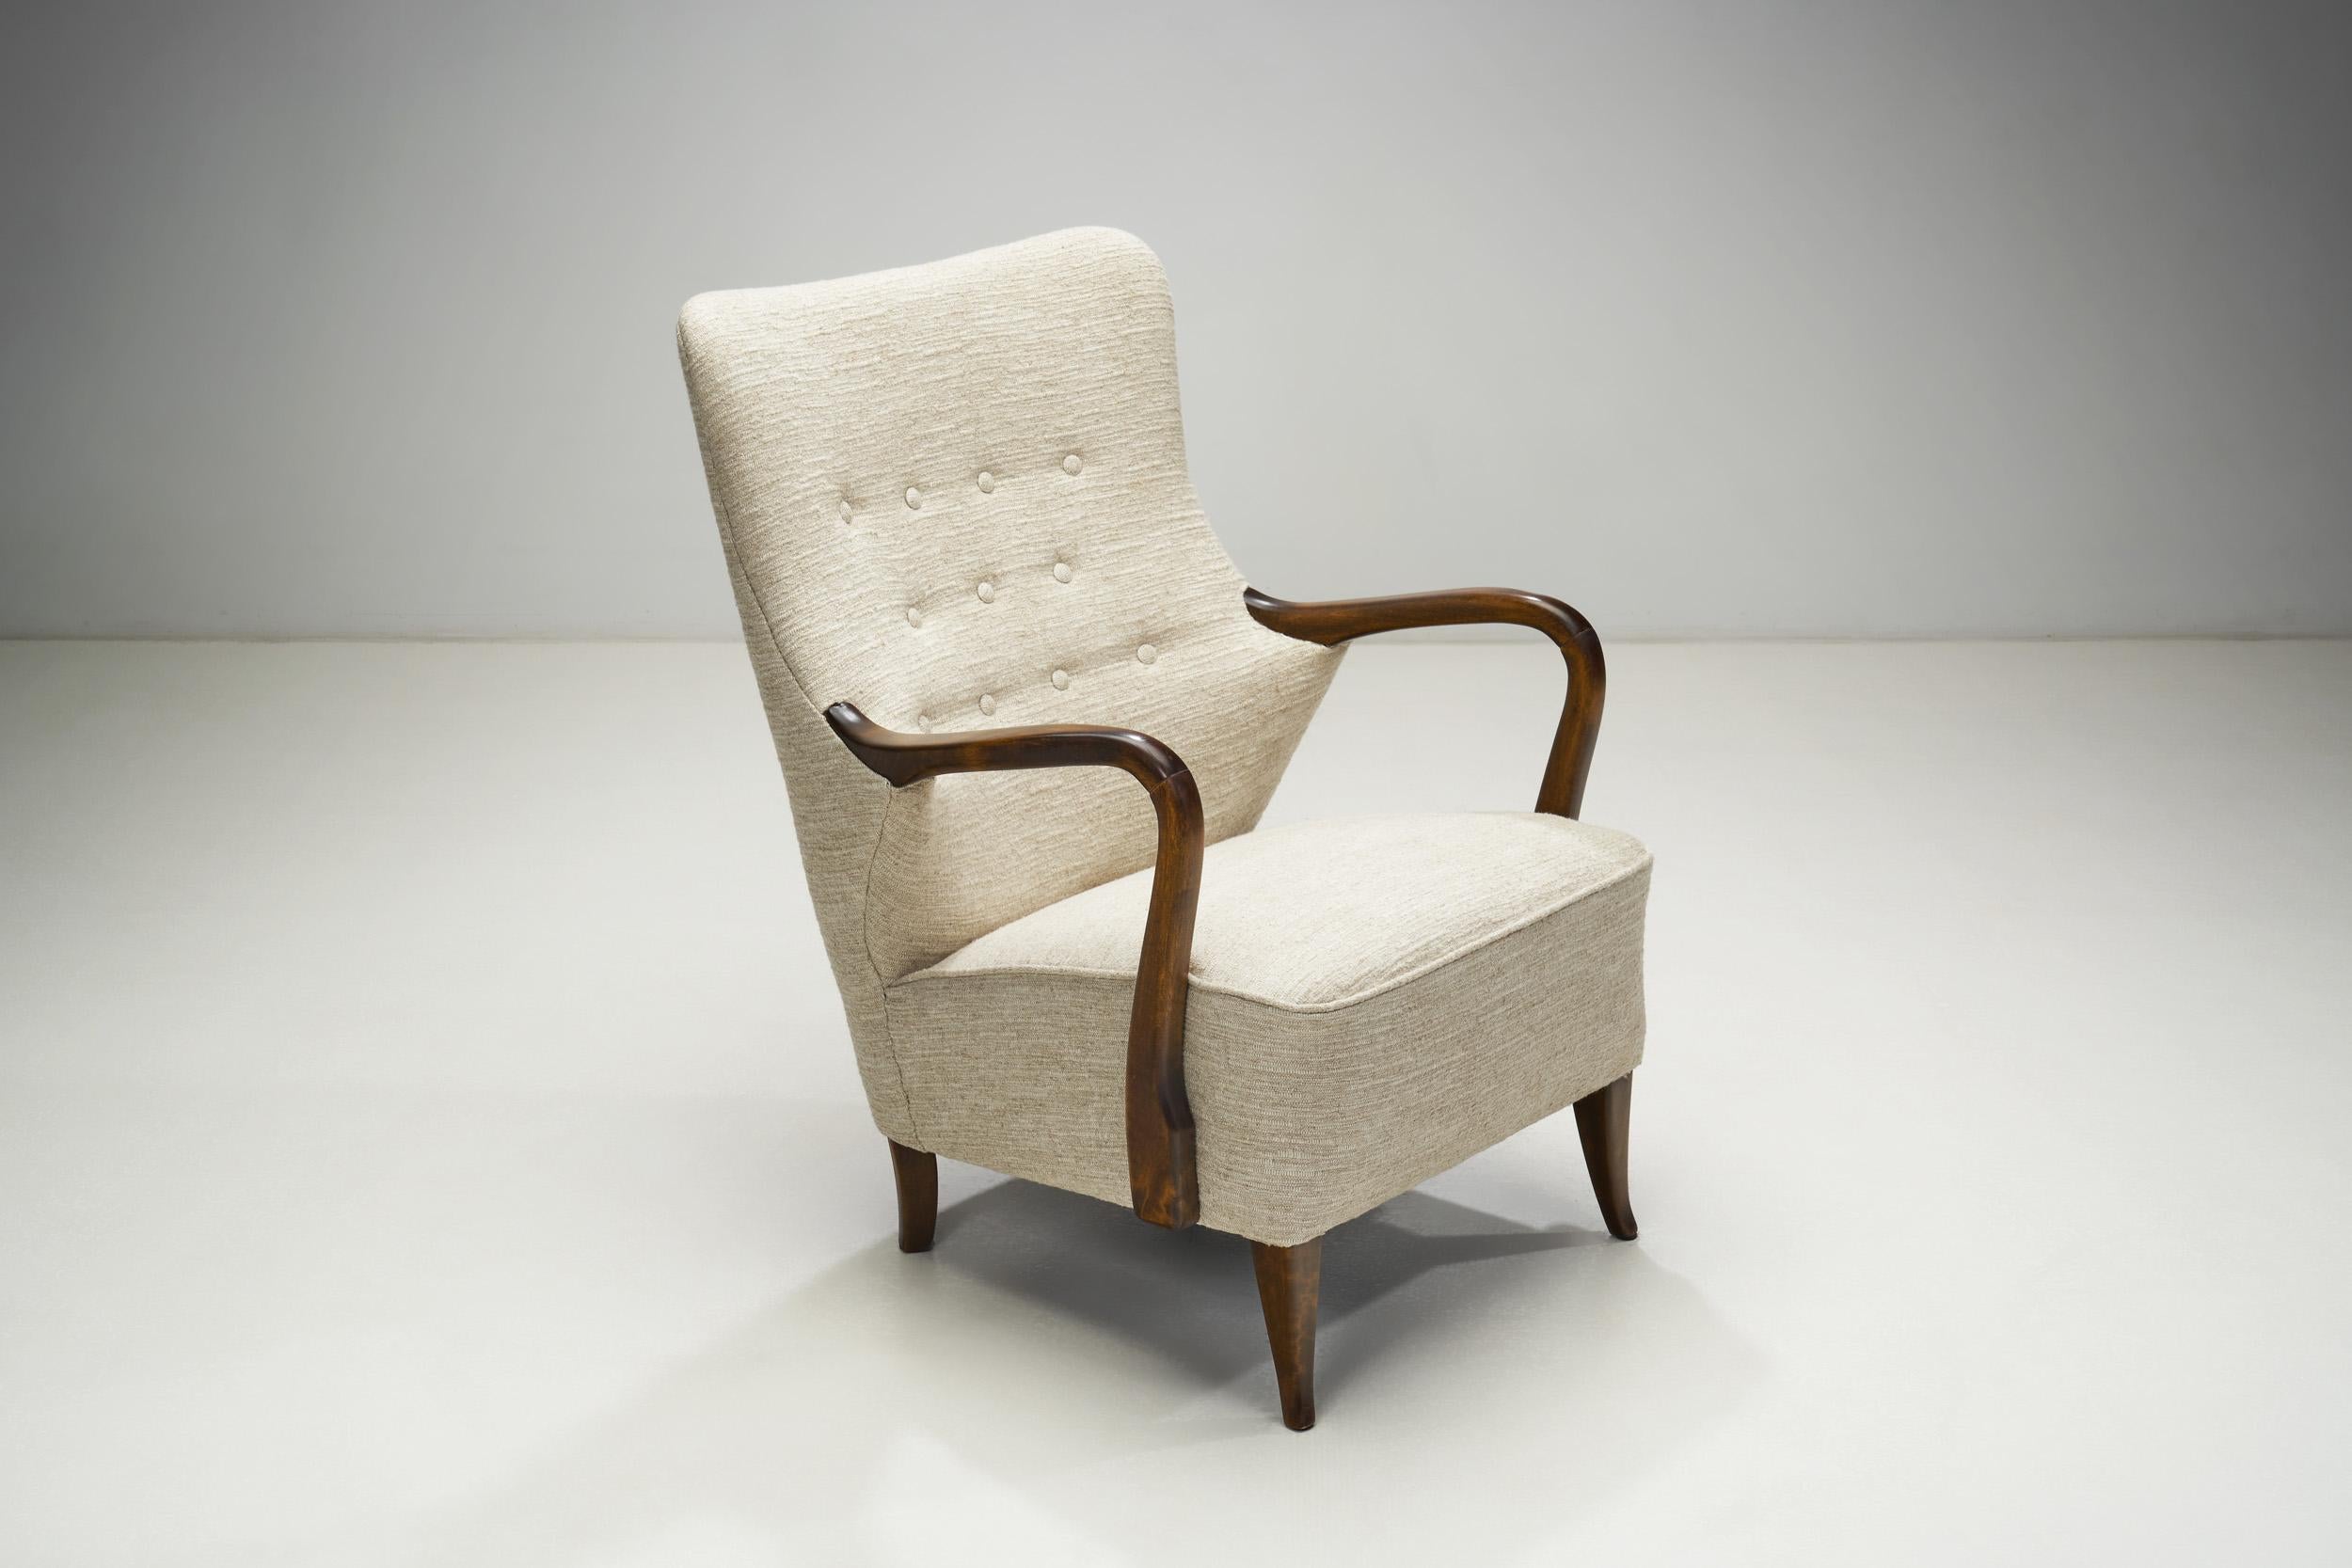 Swedish Upholstered Wooden Armchair with Curved Arms, Sweden ca 1940s For Sale 1